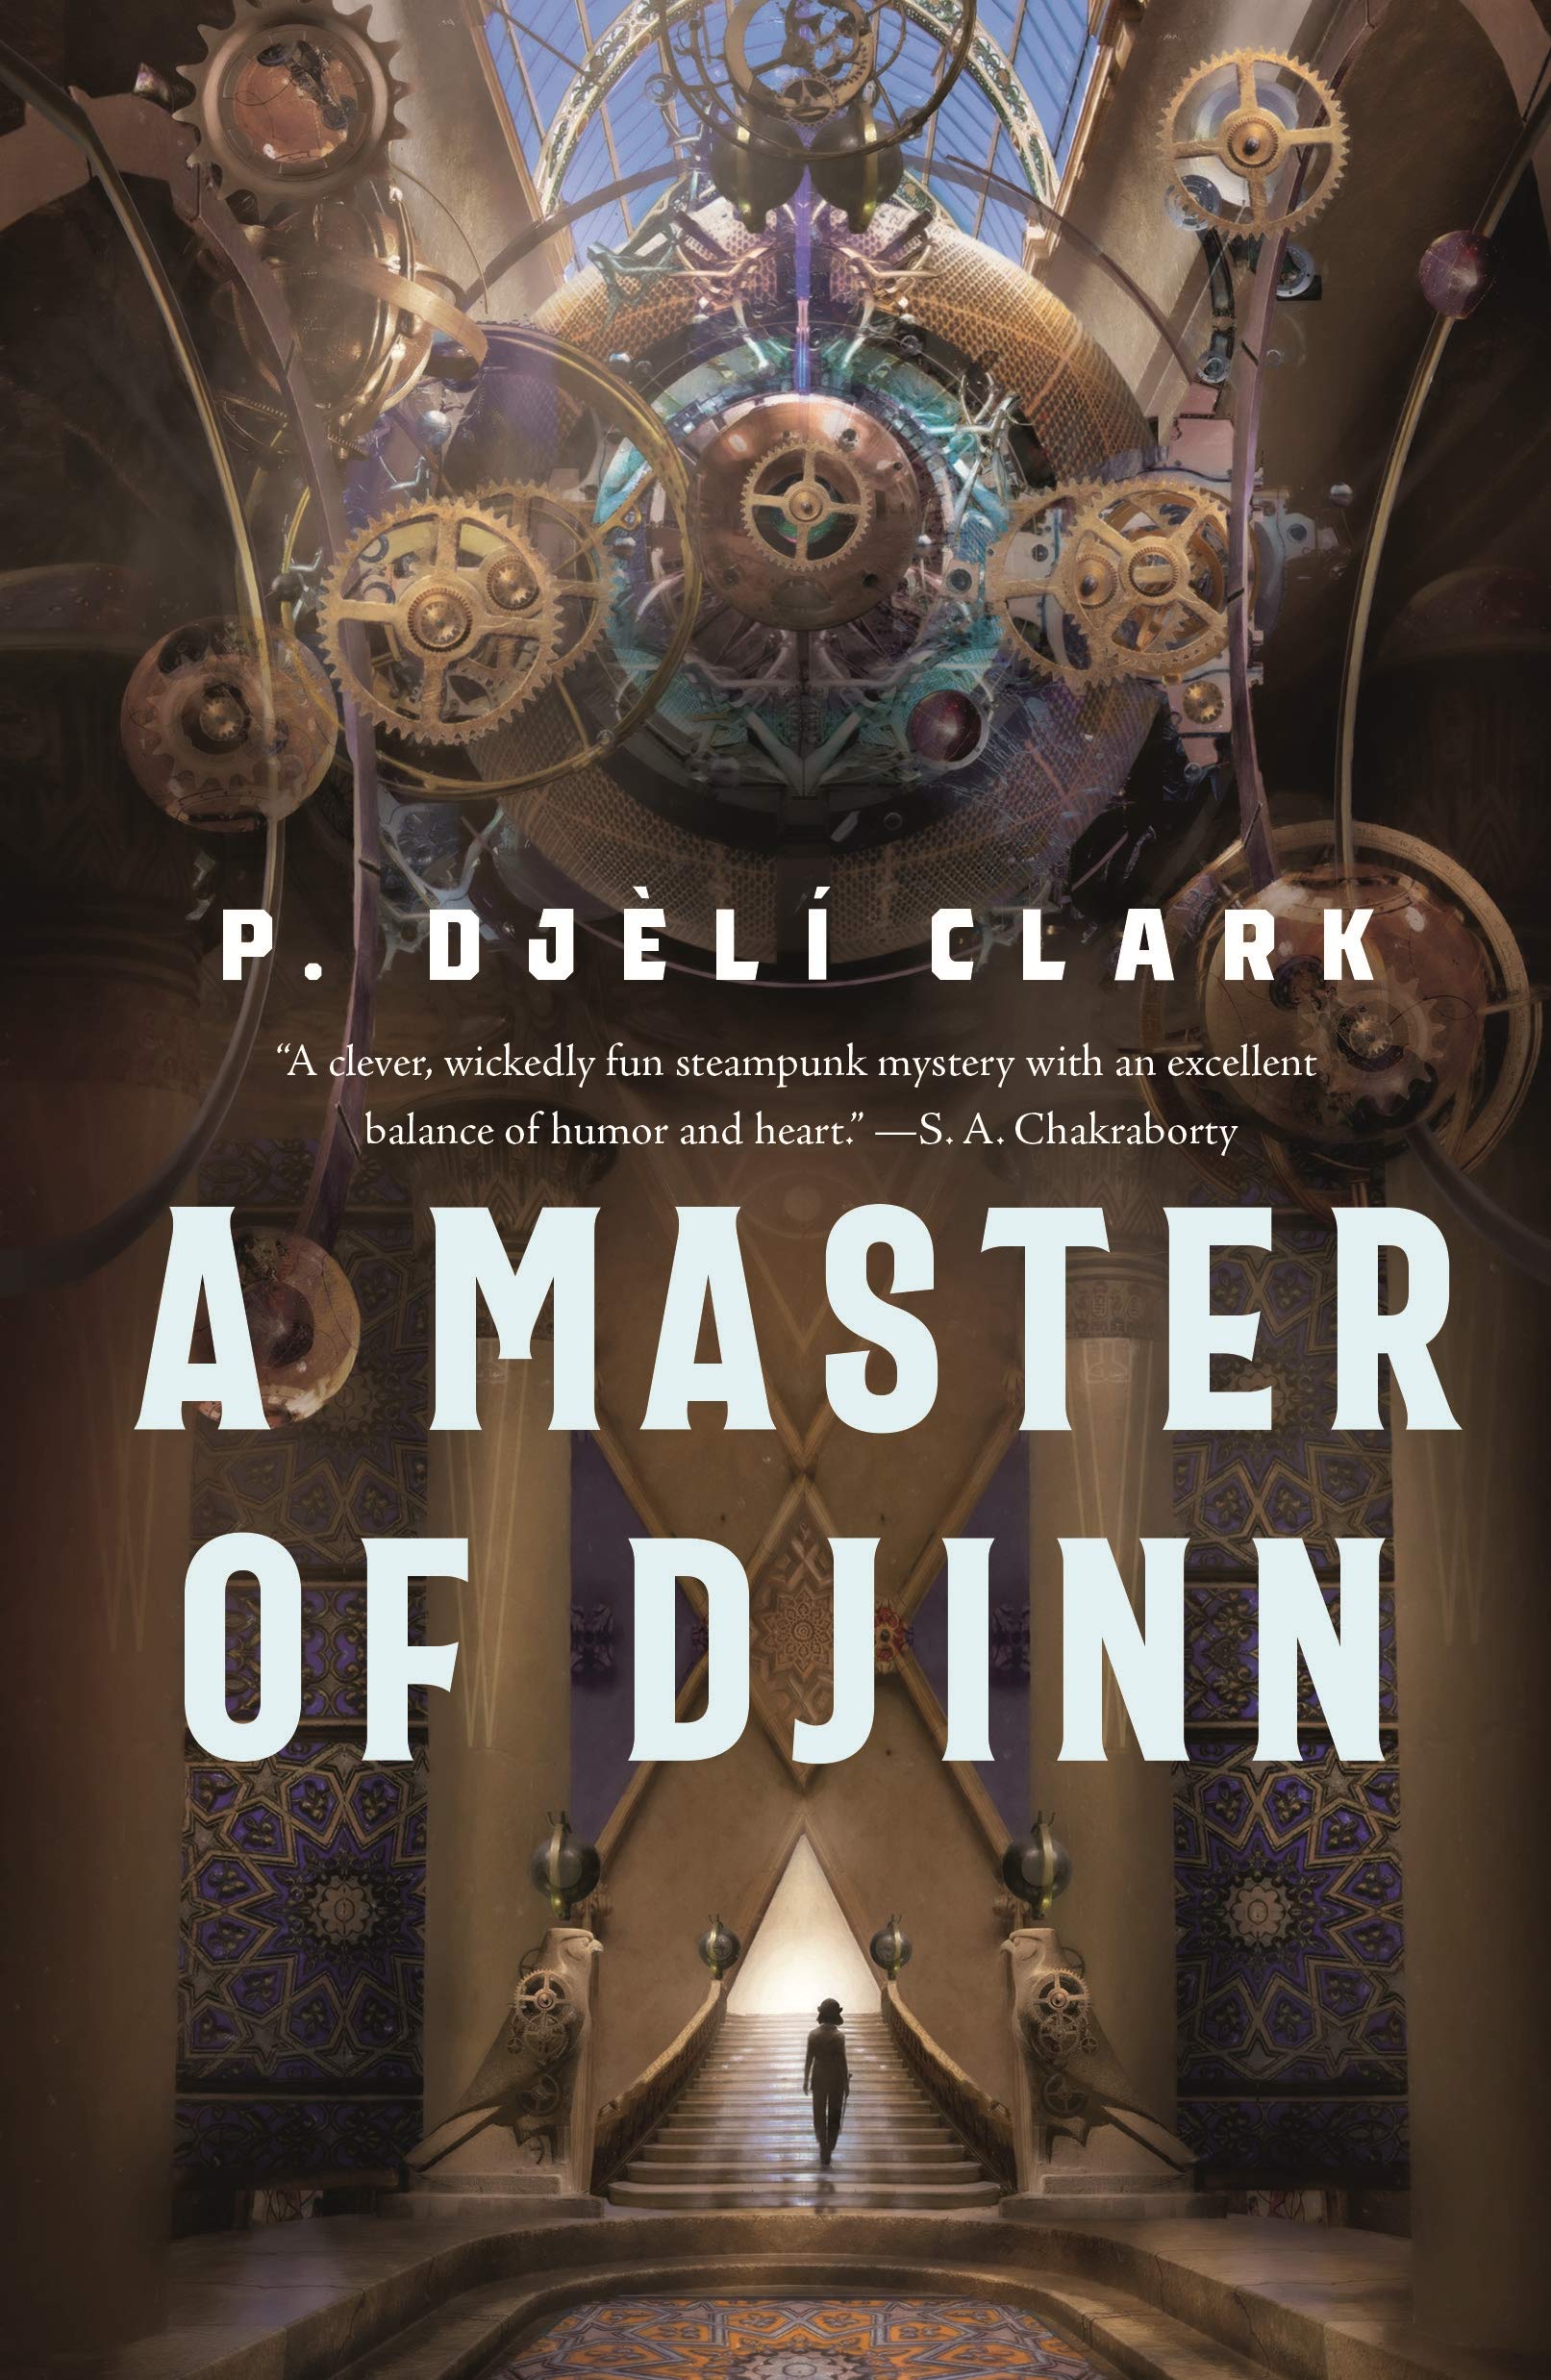 Image for "A Master of Djinn"